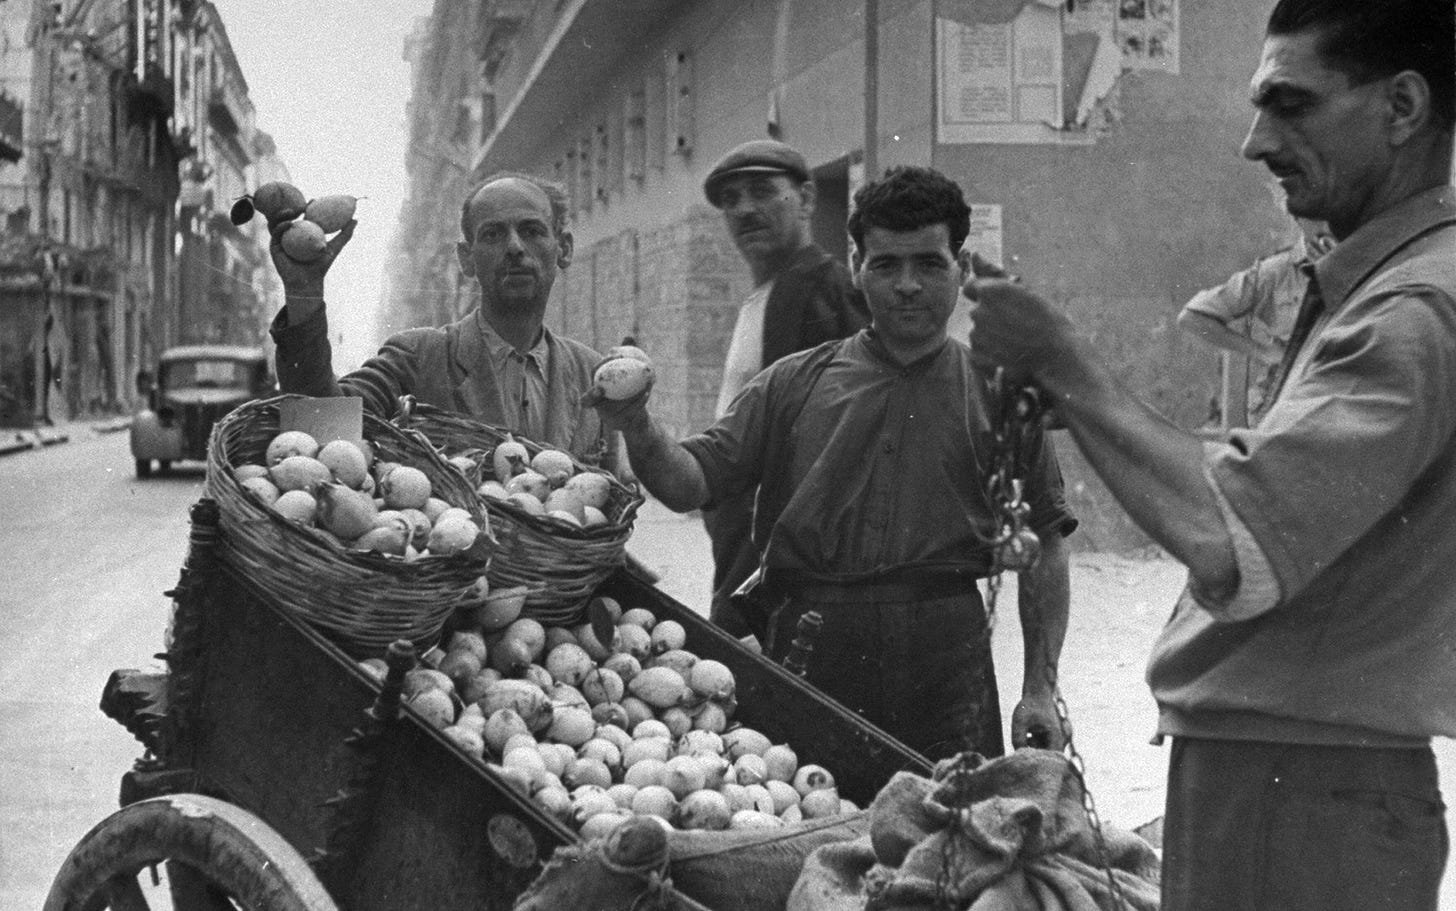 How a growing market for citrus fruit spawned the mafia | Aeon Essays